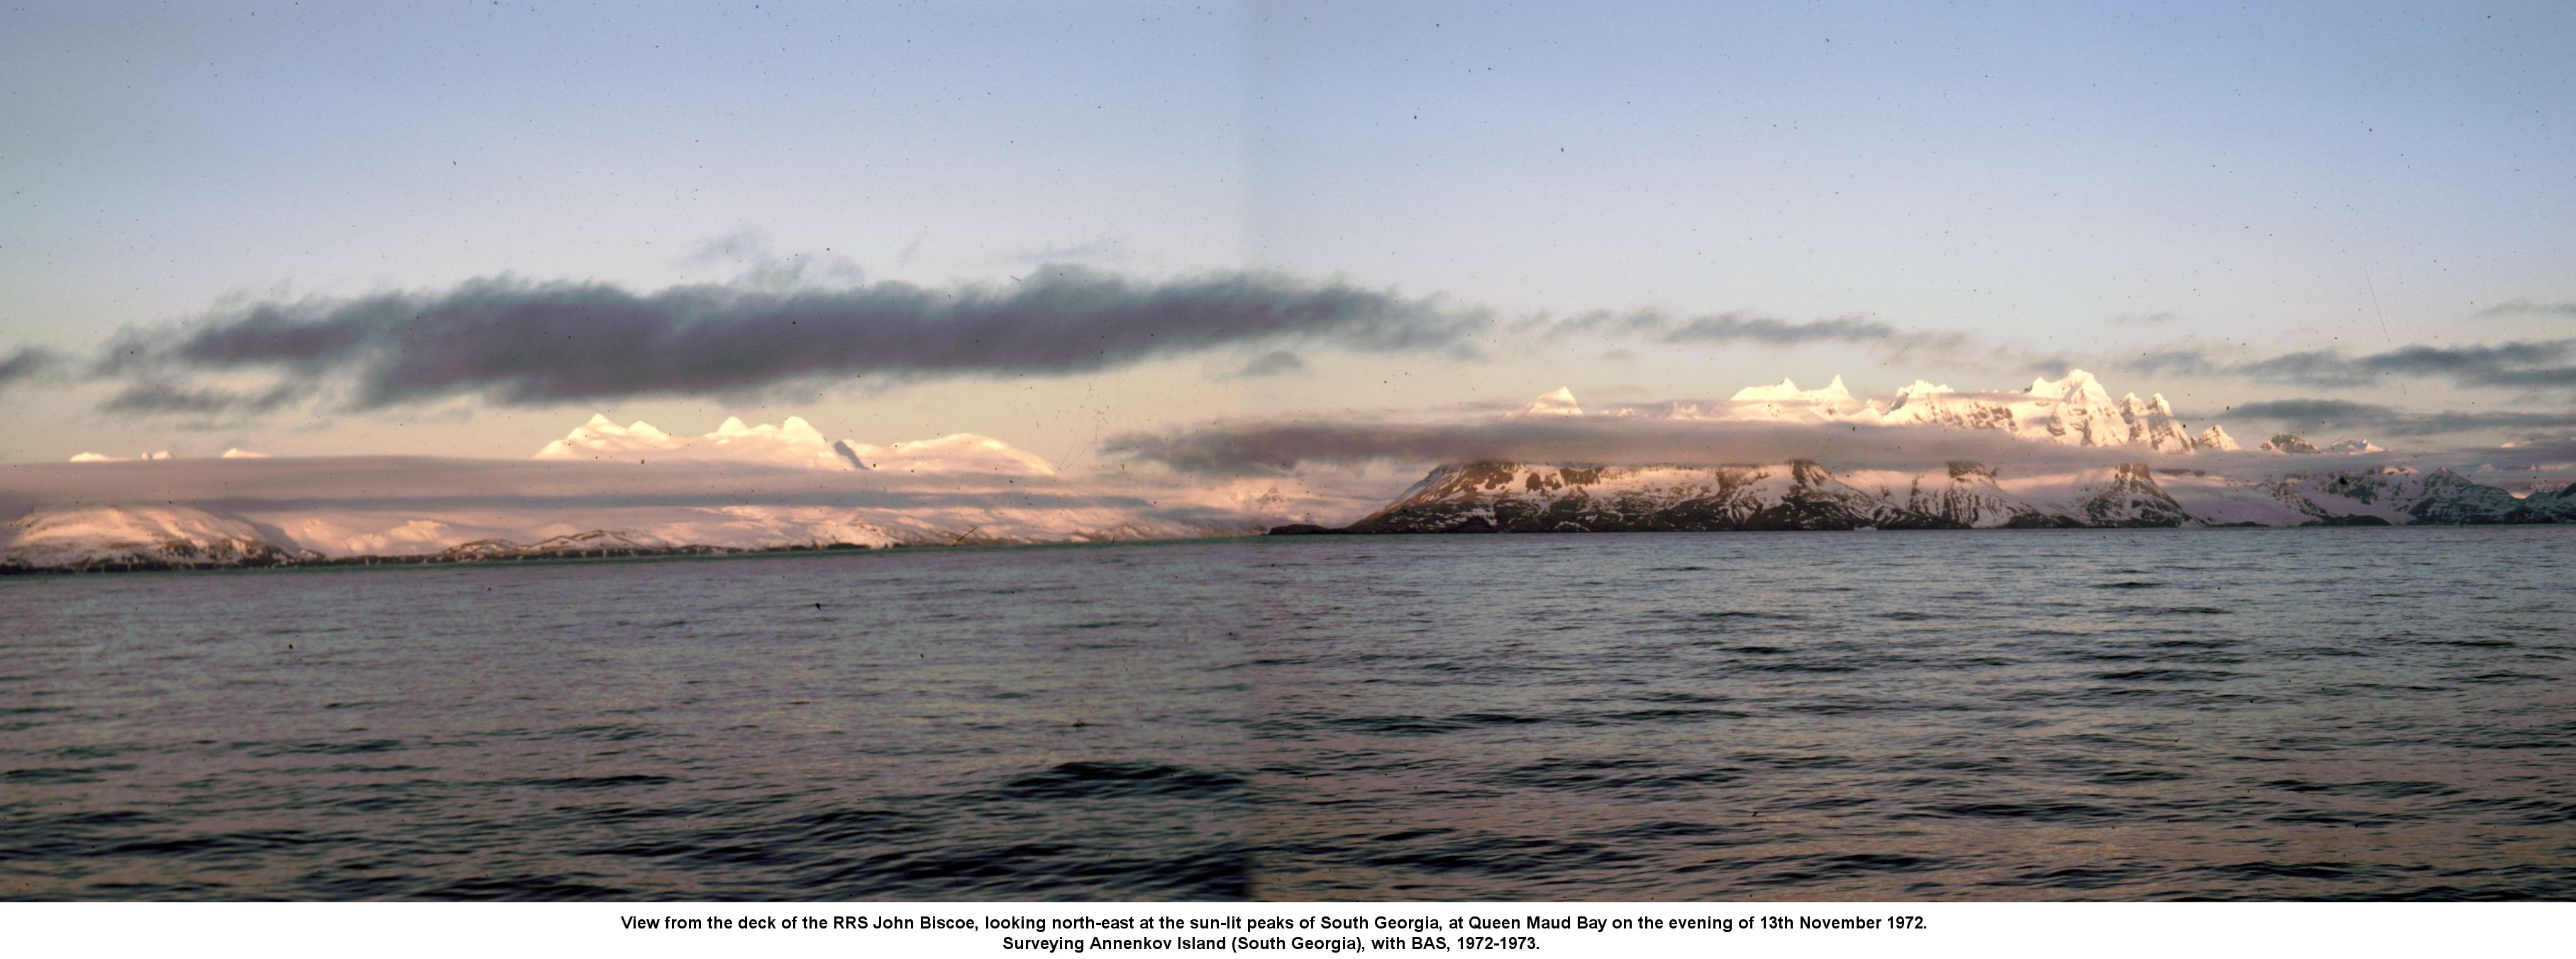 View from the deck of the RRS John Biscoe, looking north-east at the sun-lit peaks of South Georgia, at Queen Maud Bay on the evening of 13th November 1972.